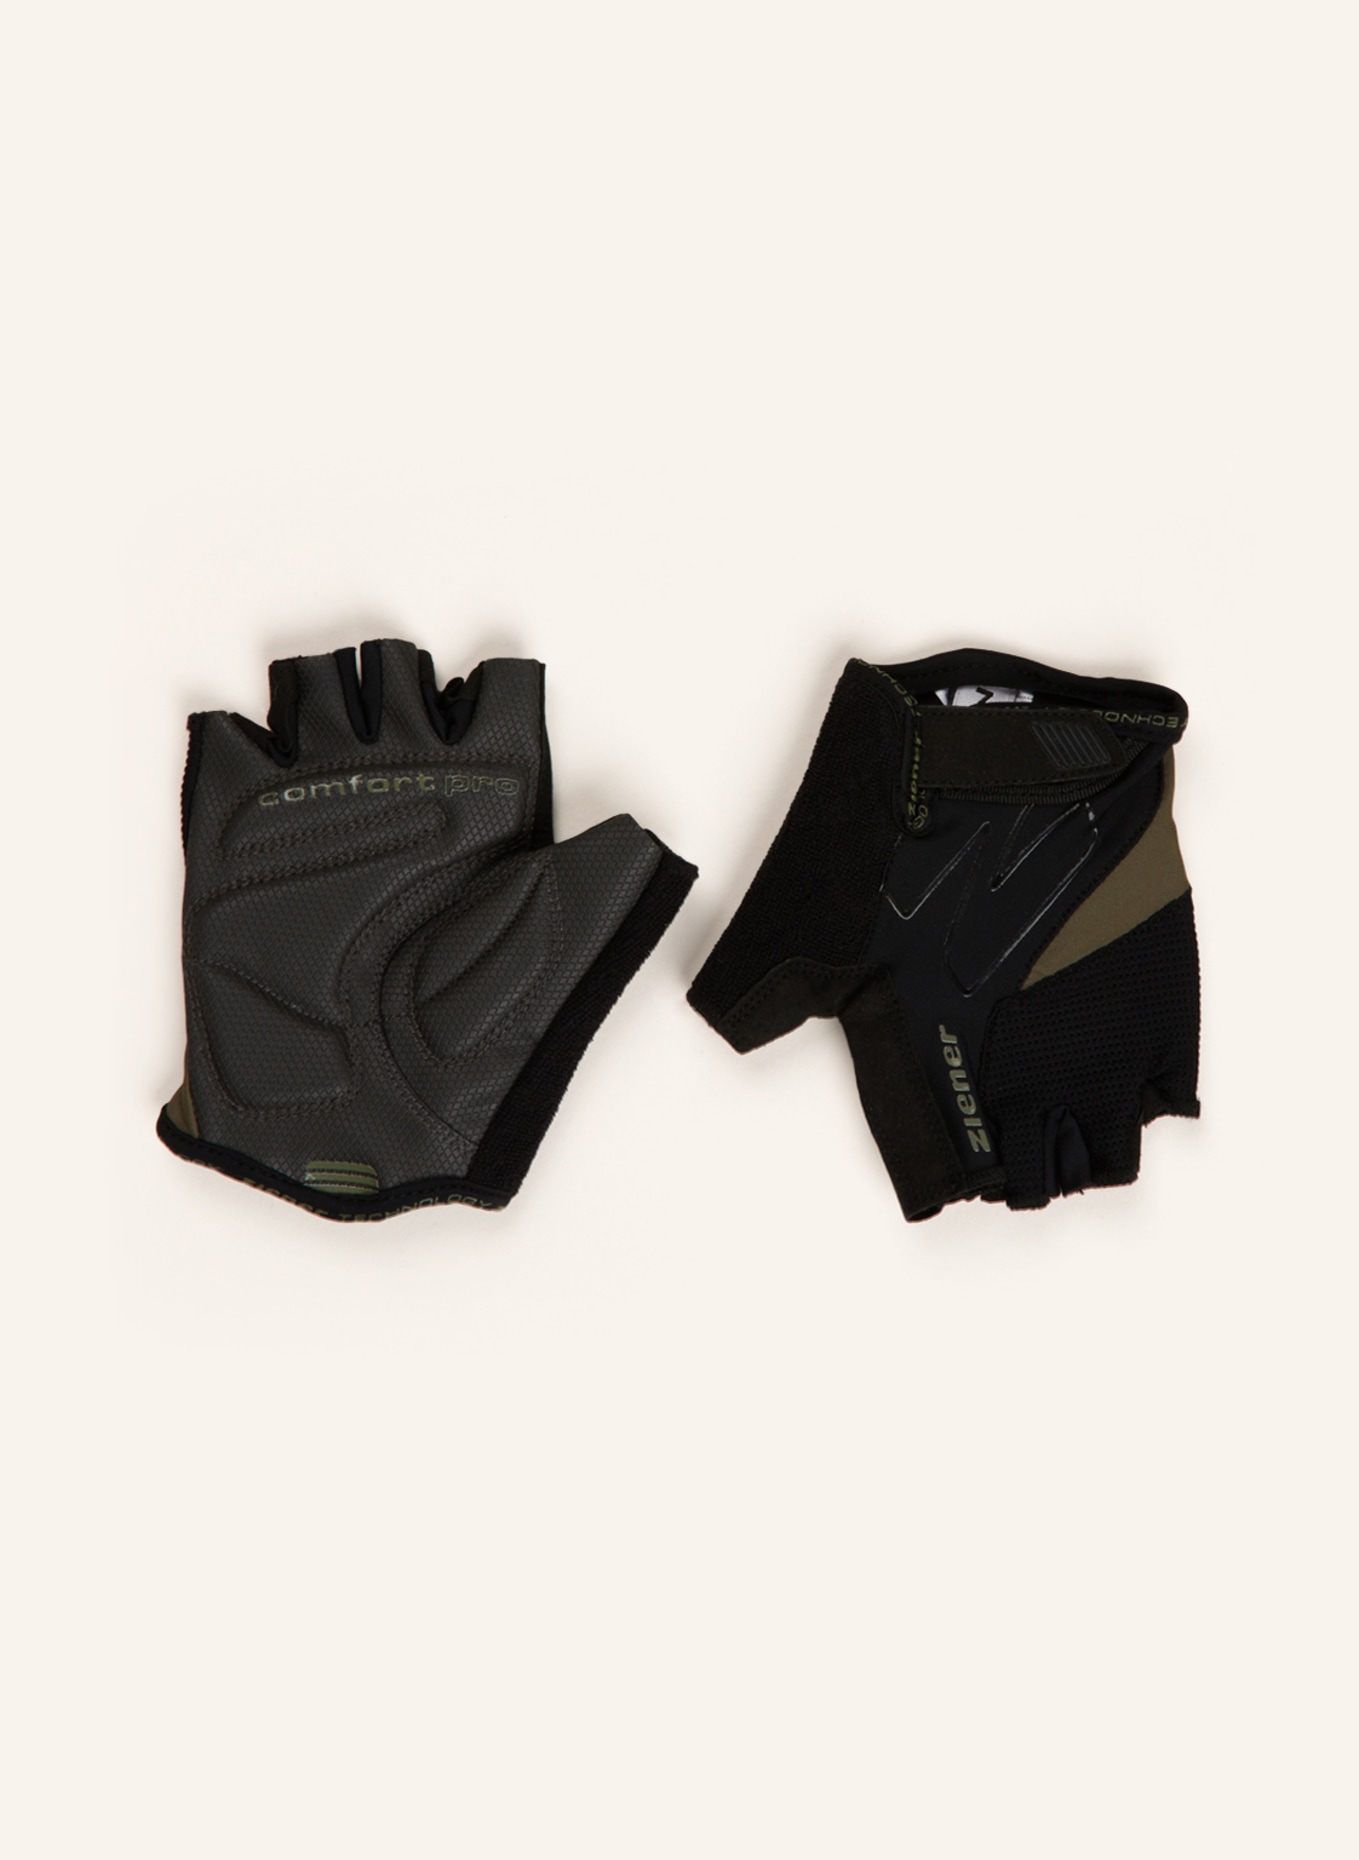 black/ khaki gloves CRAVE Cycling ziener in